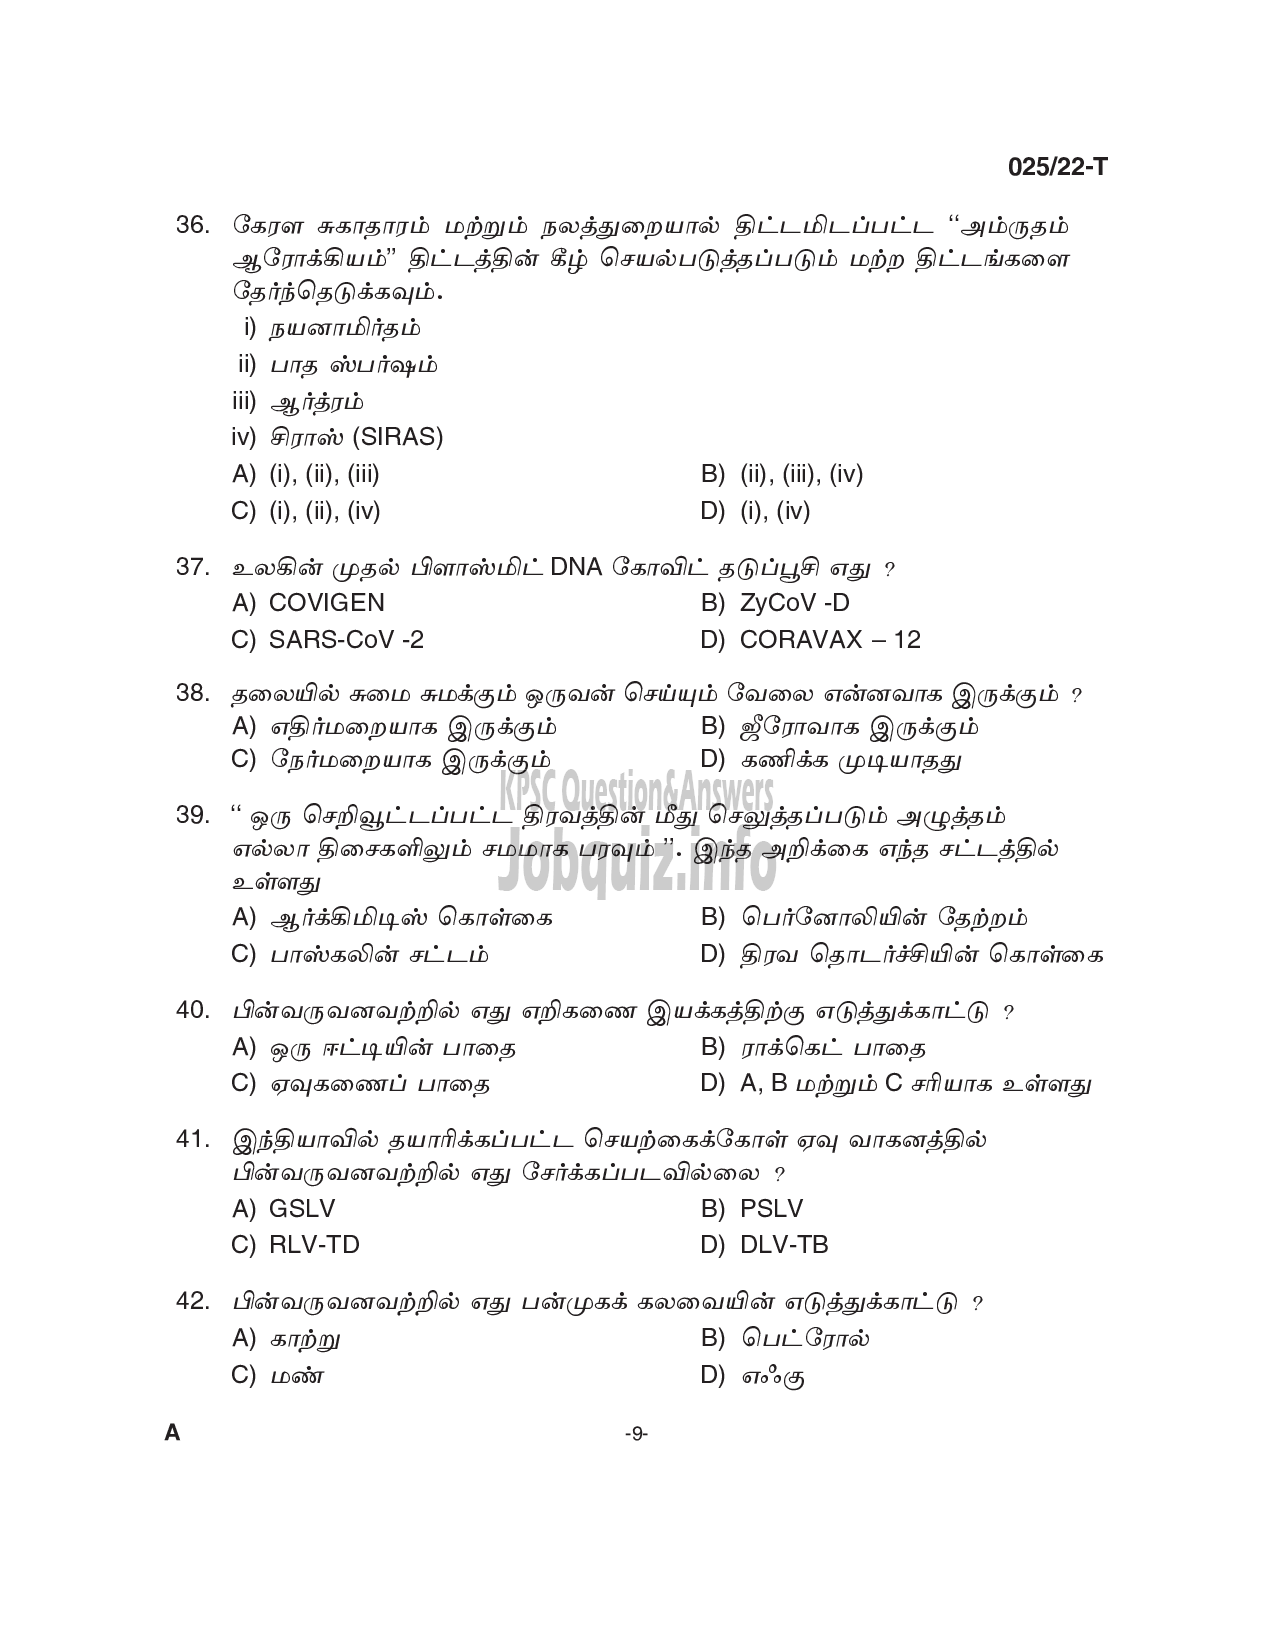 Kerala PSC Question Paper -  Civil Excise Officer/ Women Civil Excise Officer (Plus 2 Level Main Examination) in Excise.  -9